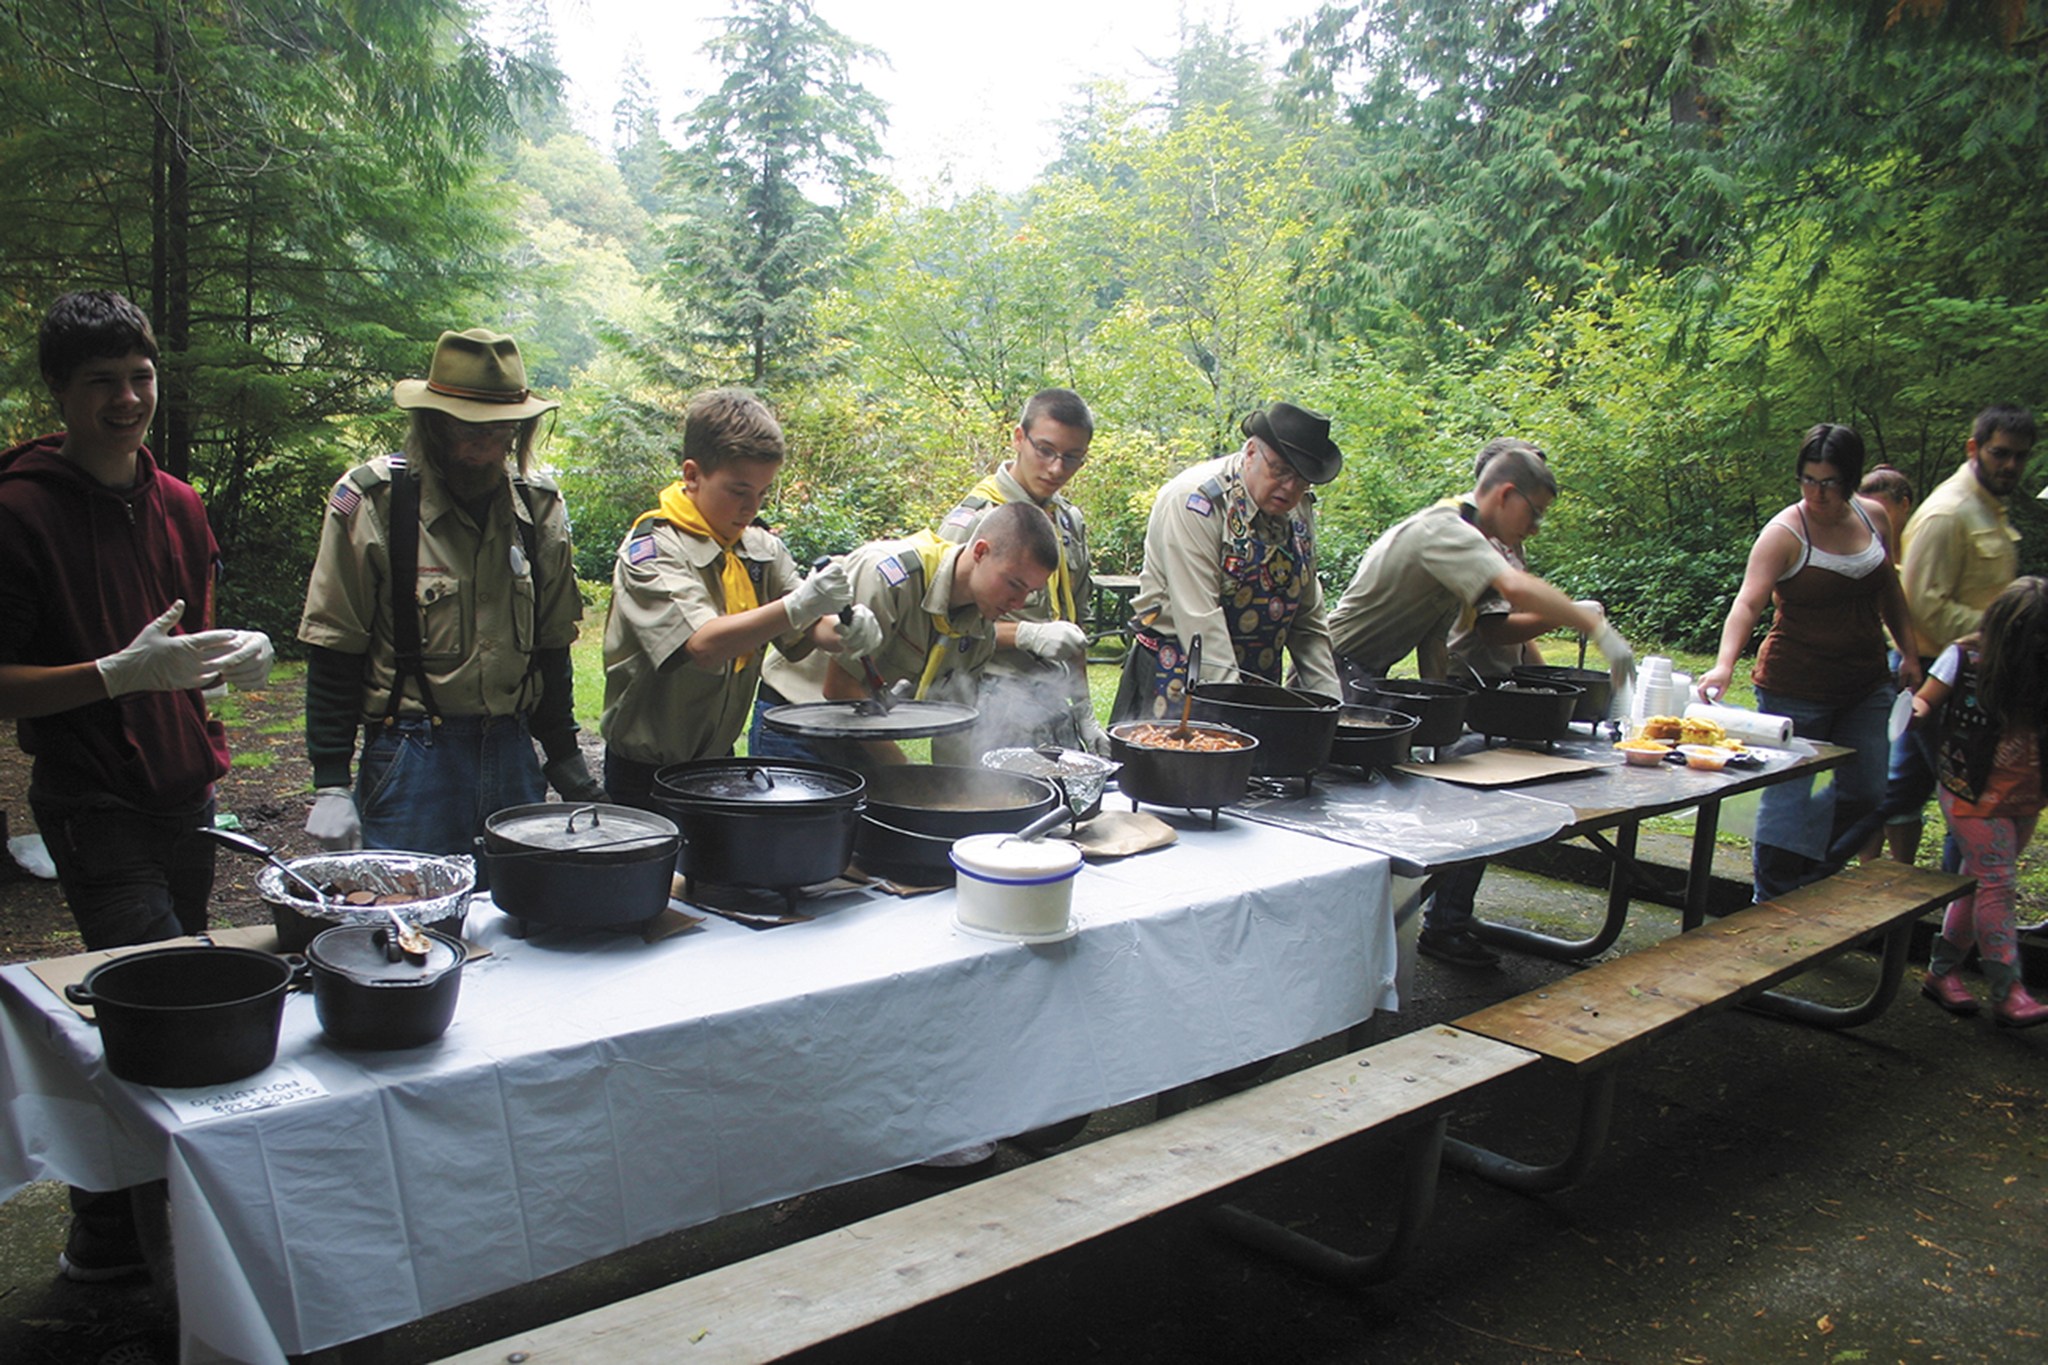 (Corey Morris | The Vidette) Boy Scouts from Troop 4015 of Montesano prepare to feed the masses after a dutch oven demonstration during the 2015 Discover Lake Sylvia Fall Festival at Lake Sylvia State Park. The boy scouts participate in the festival with a demonstration every year. Each scout makes a unique dish. Last year, the dishes dished out of the dutch ovens ranged from brownies to pizza.